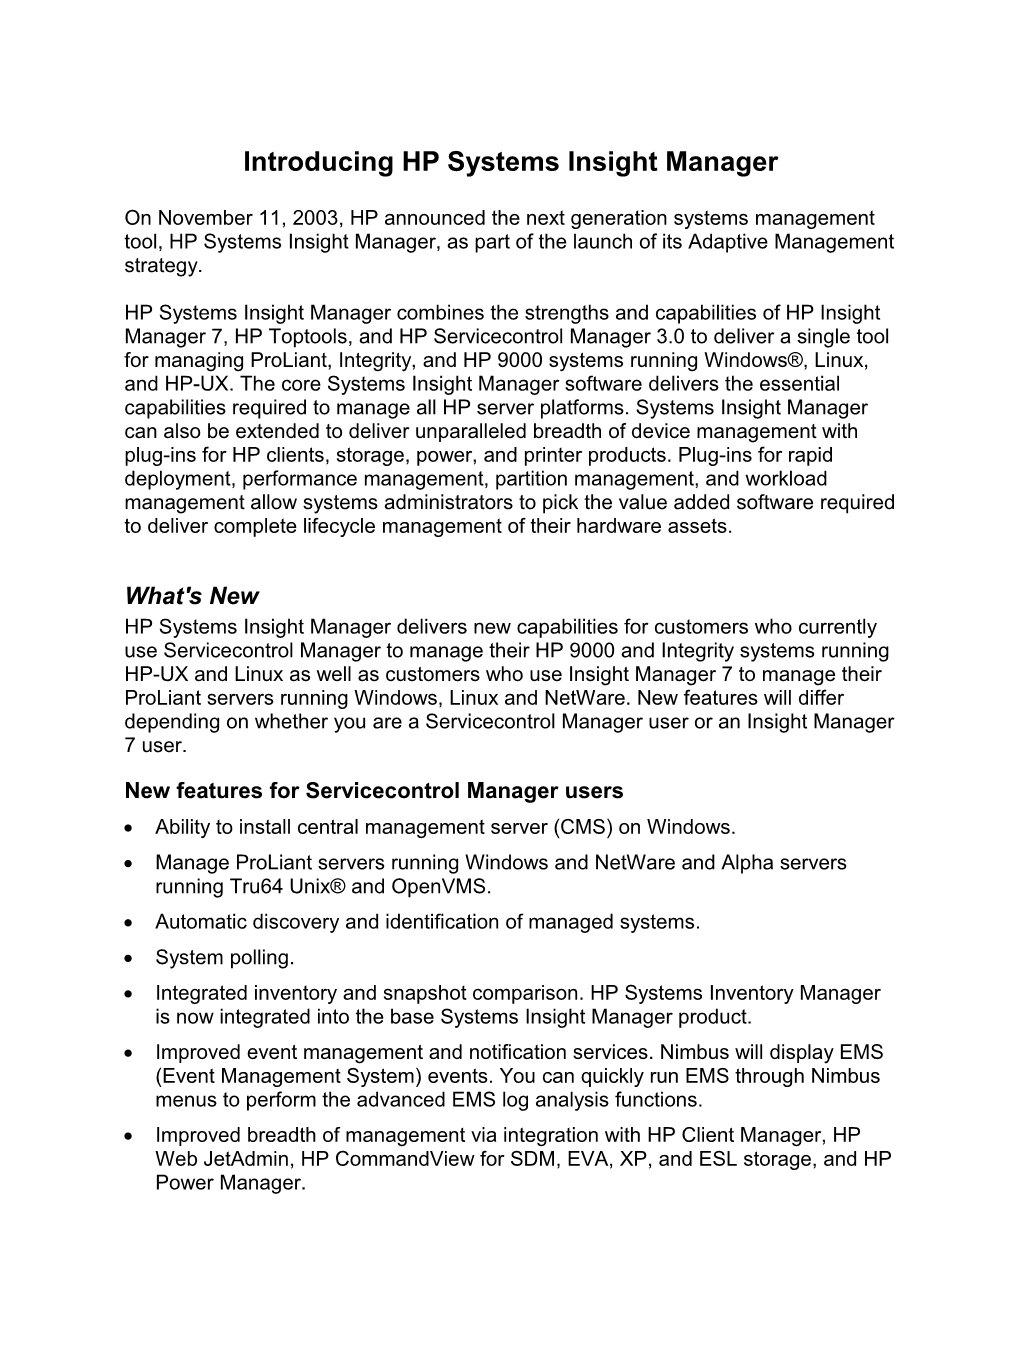 HP Systems Insight Manager